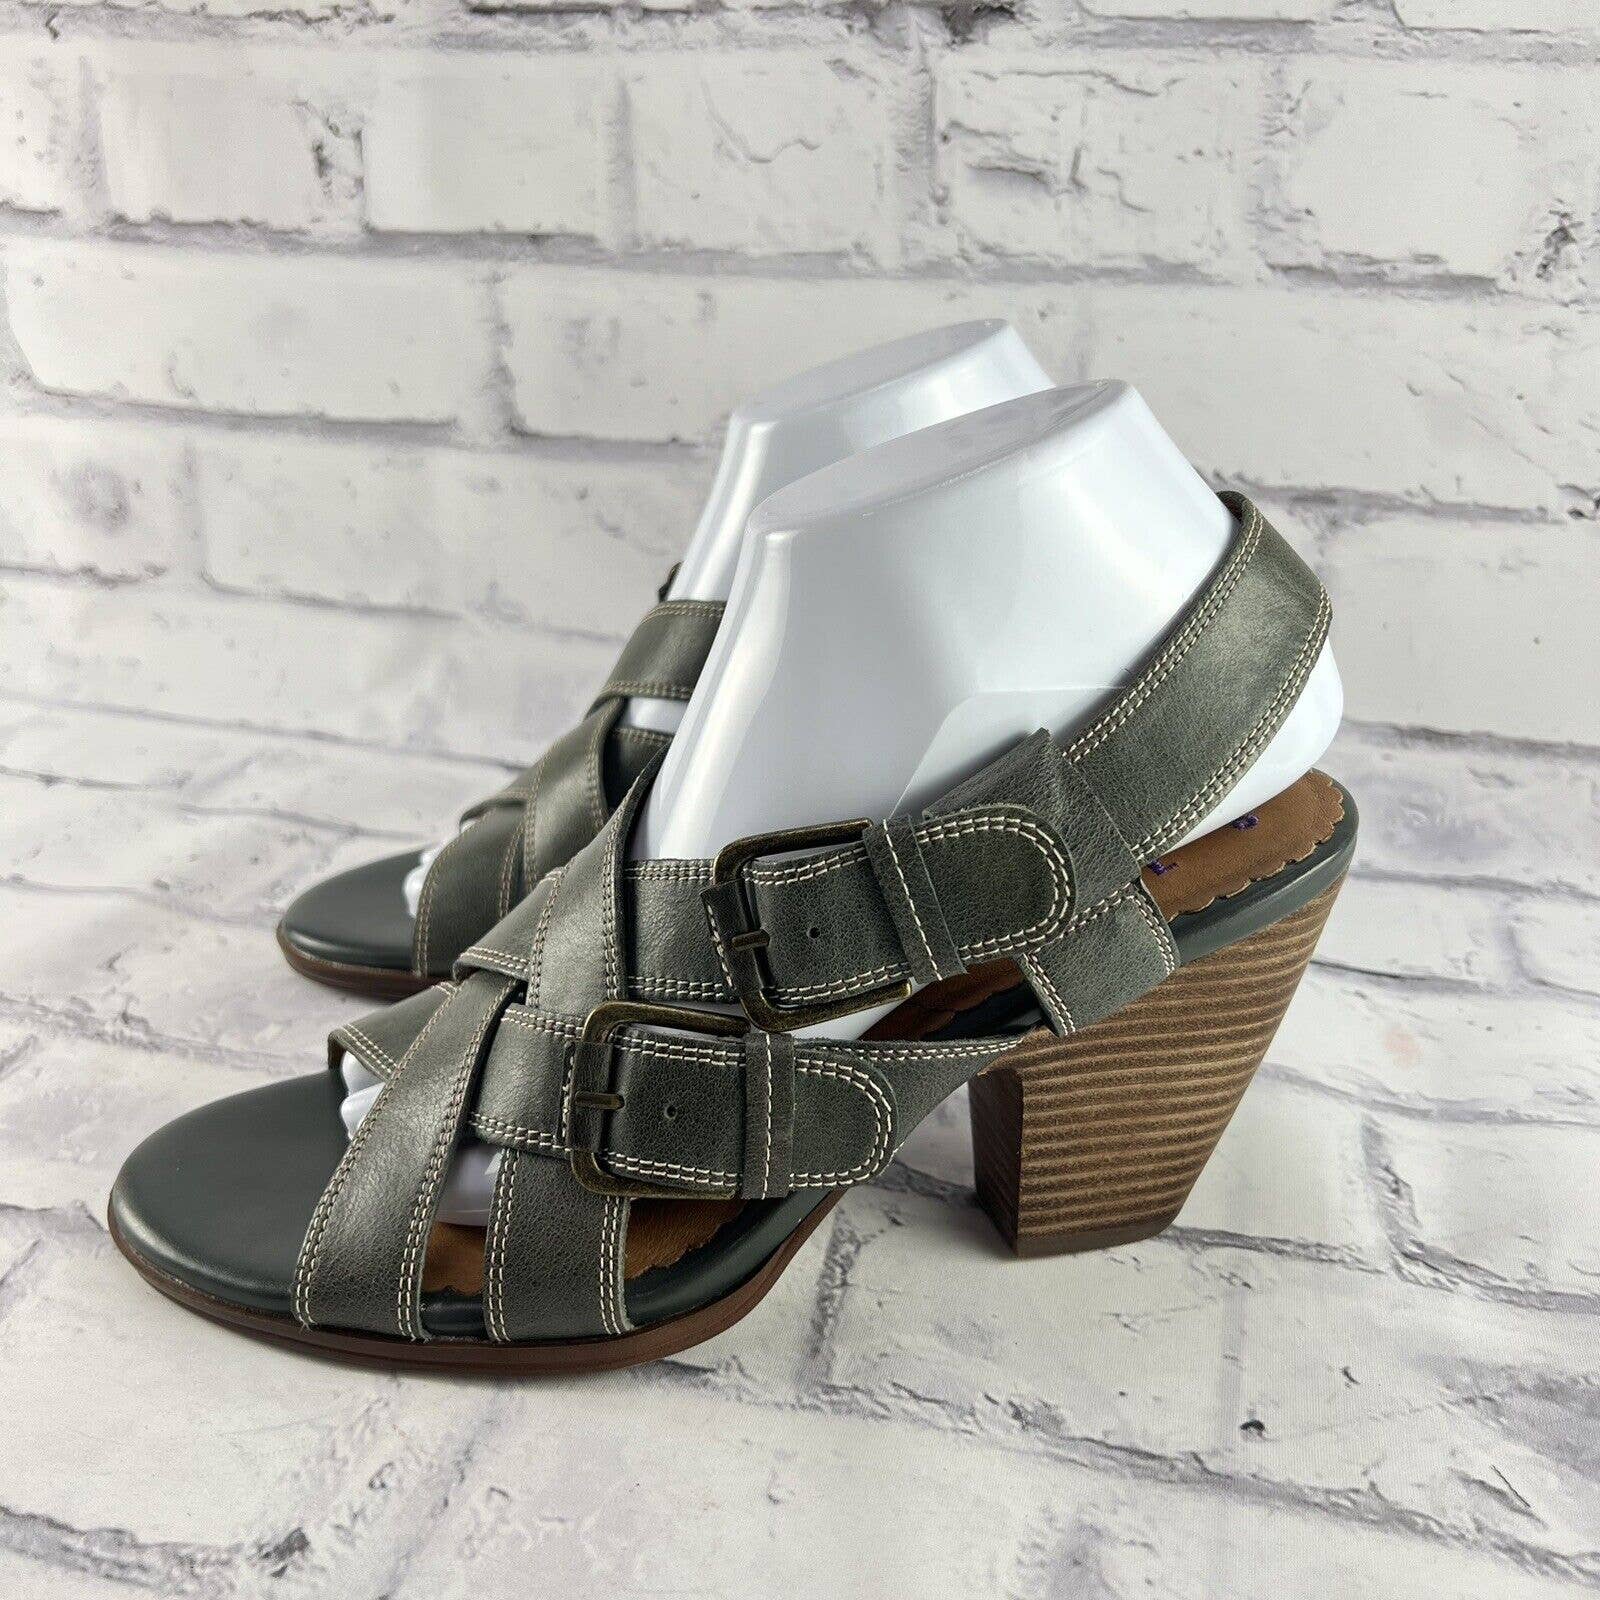 Indigo By Clarks Slingback Sandals Women’s 9 Strappy Double Buckle Green Leather